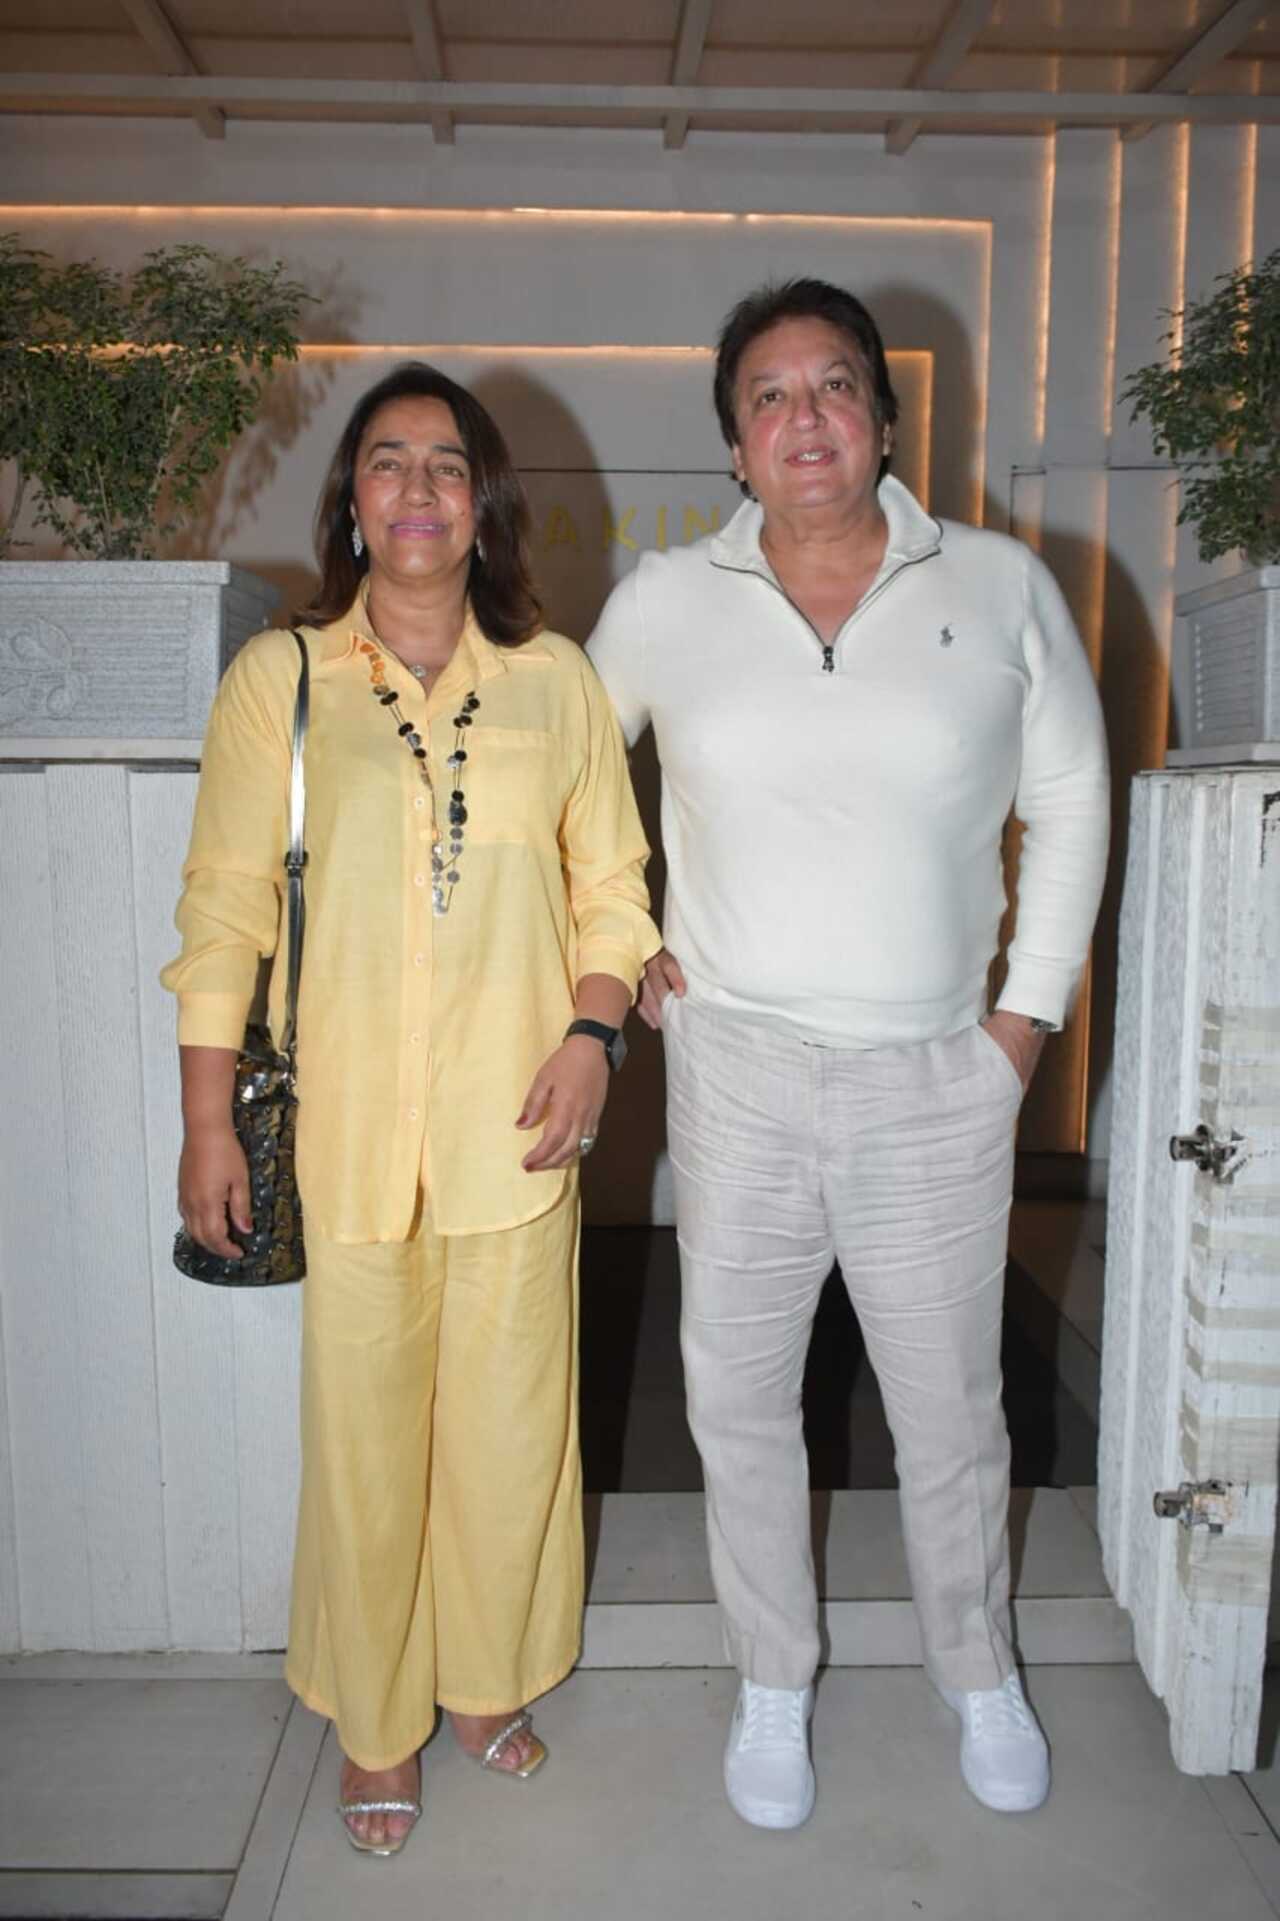 Akansha's parents Anu and Shashi Ranjan posed for the paparazzi outside the party venue. While she was dressed in an all-yellow outfit, he opted for a white attire